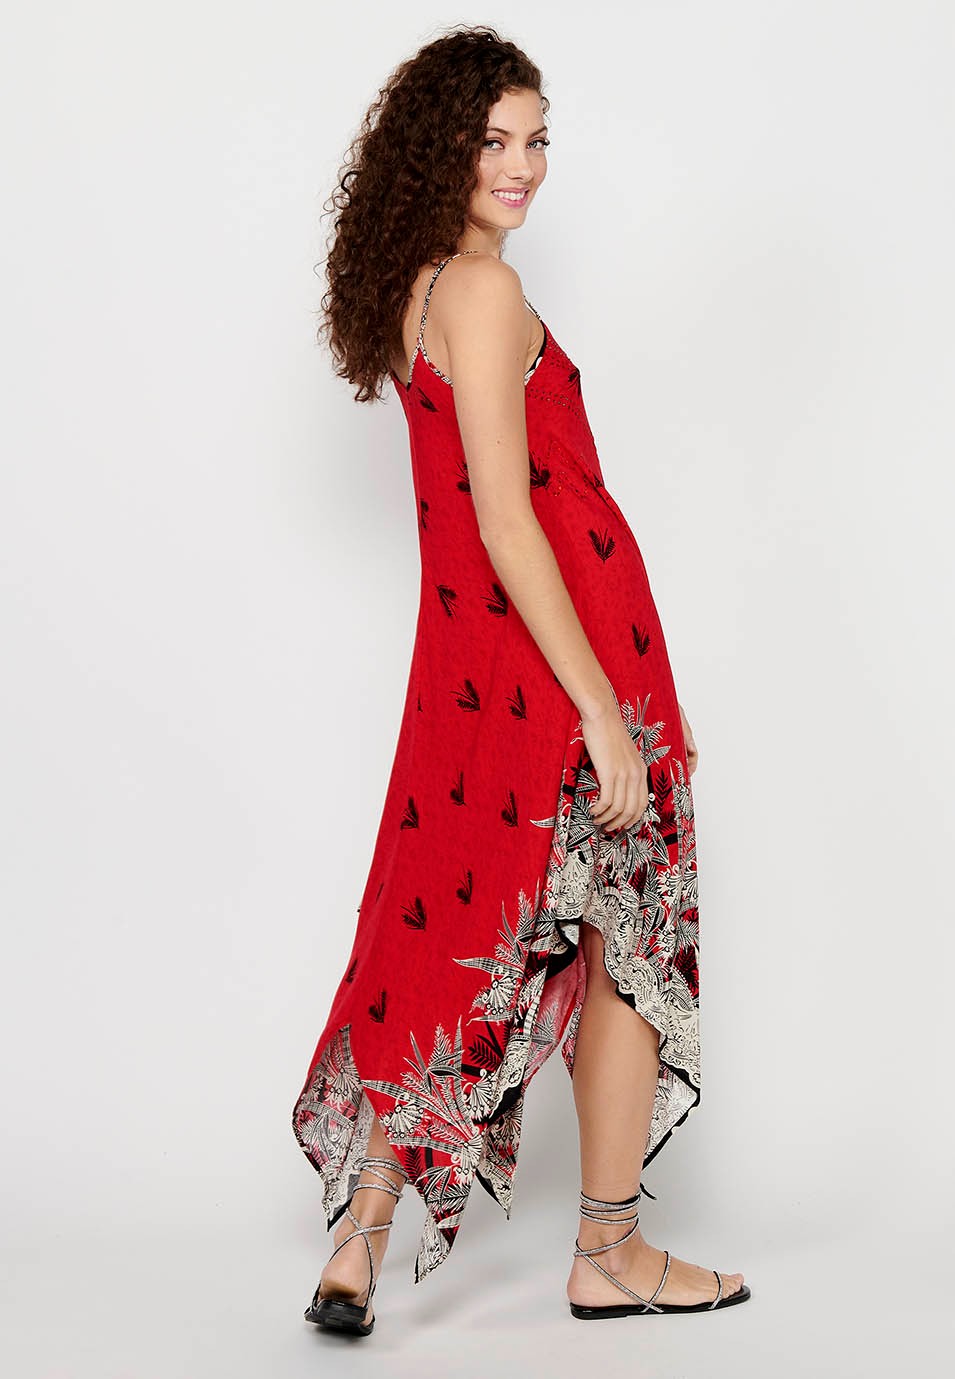 Strap Dress with V-neckline and Red Floral Print for Women 3